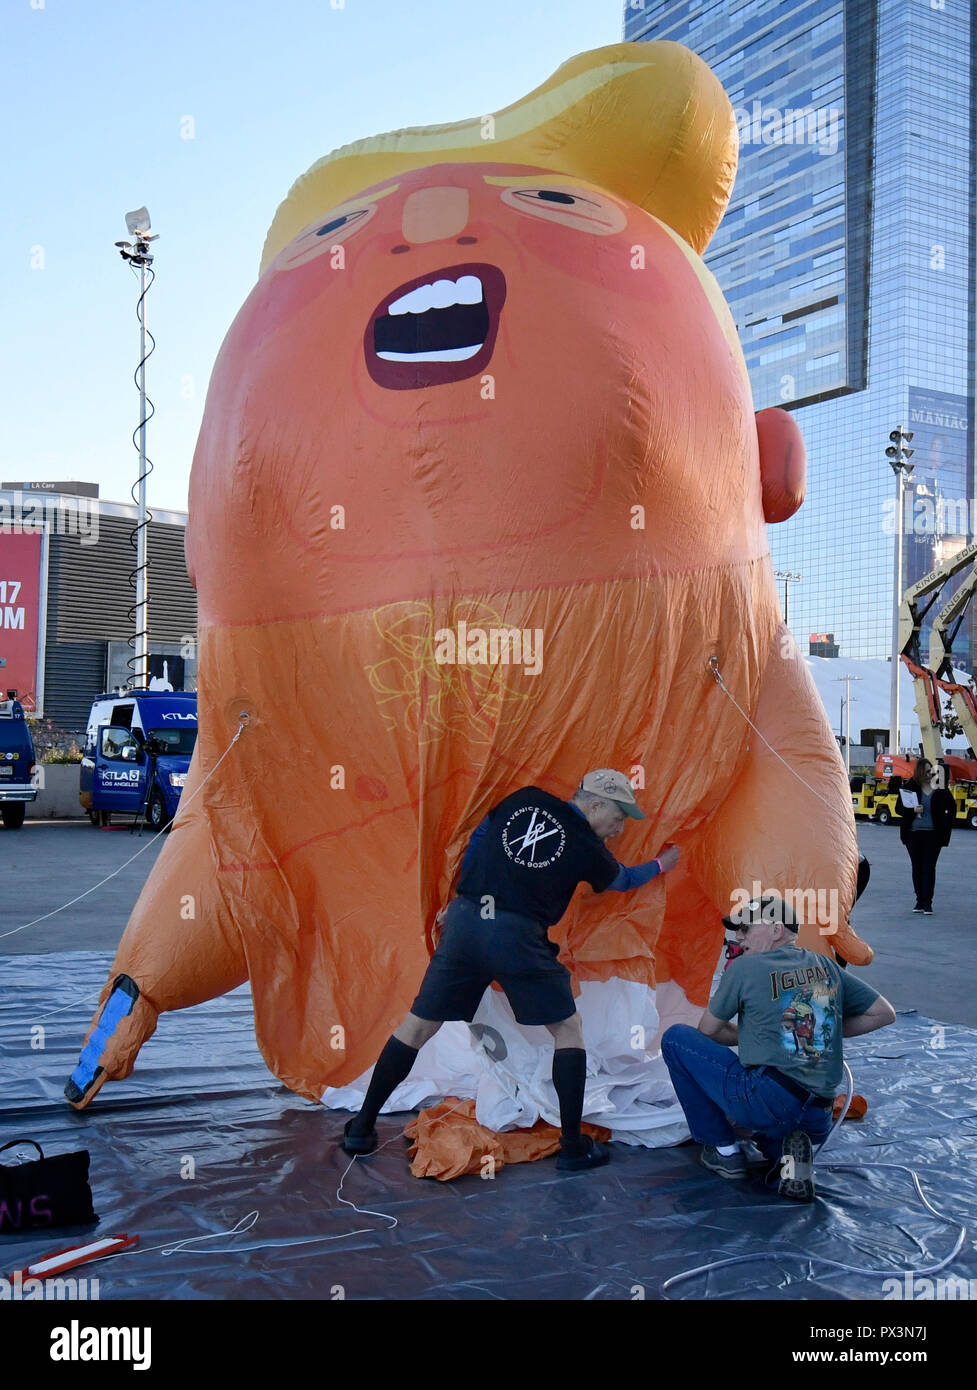 10-19-18. Los Angeles CA. DOWNTOWN LOS ANGELES .A giant balloon depicting  President Donald Trump as an angry baby makes its West Coast debut at  Politicon in downtown Los Angeles Friday.The baby Trump